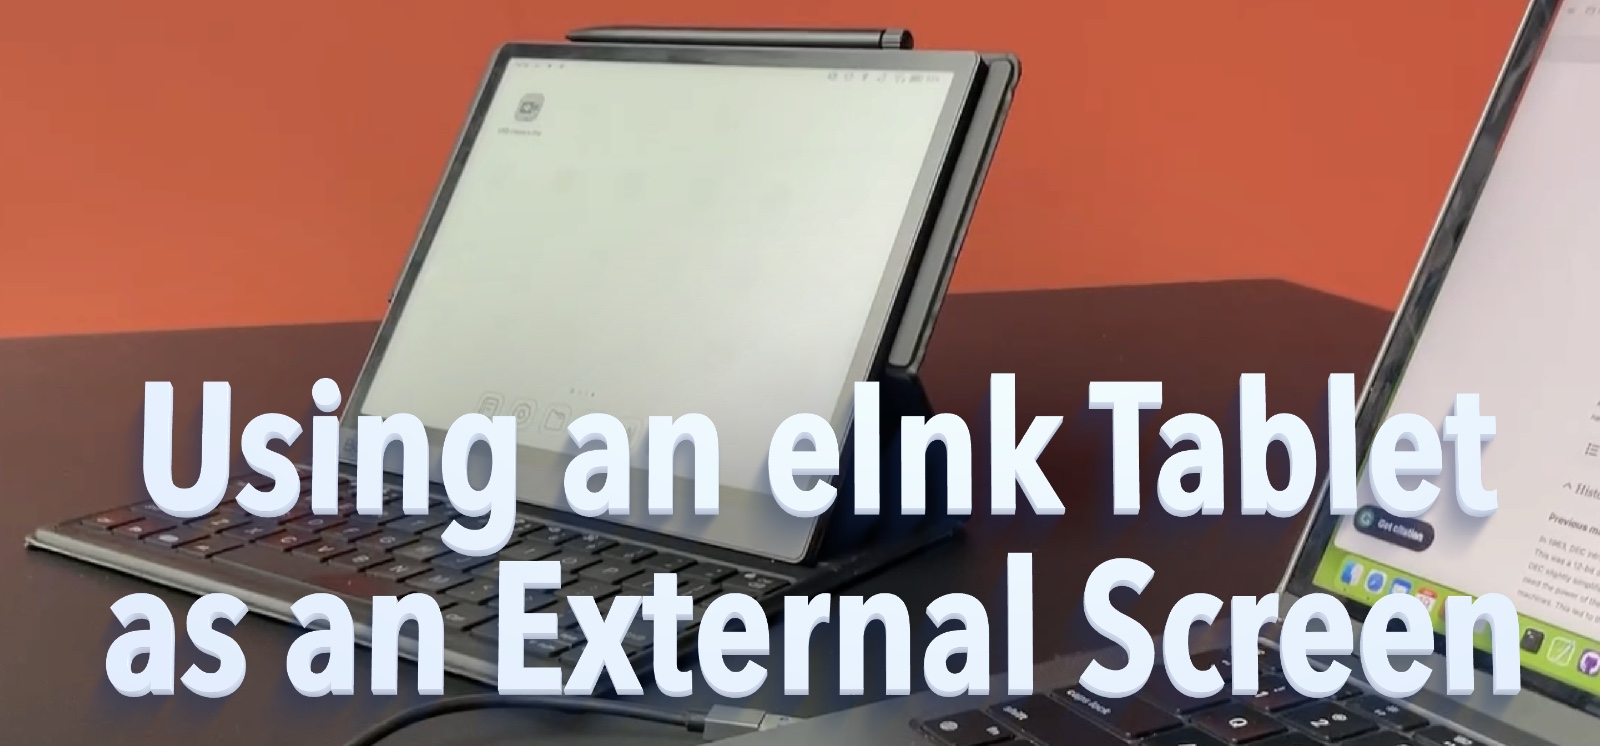 Using the MacBook with an eInk Tablet as an External Display